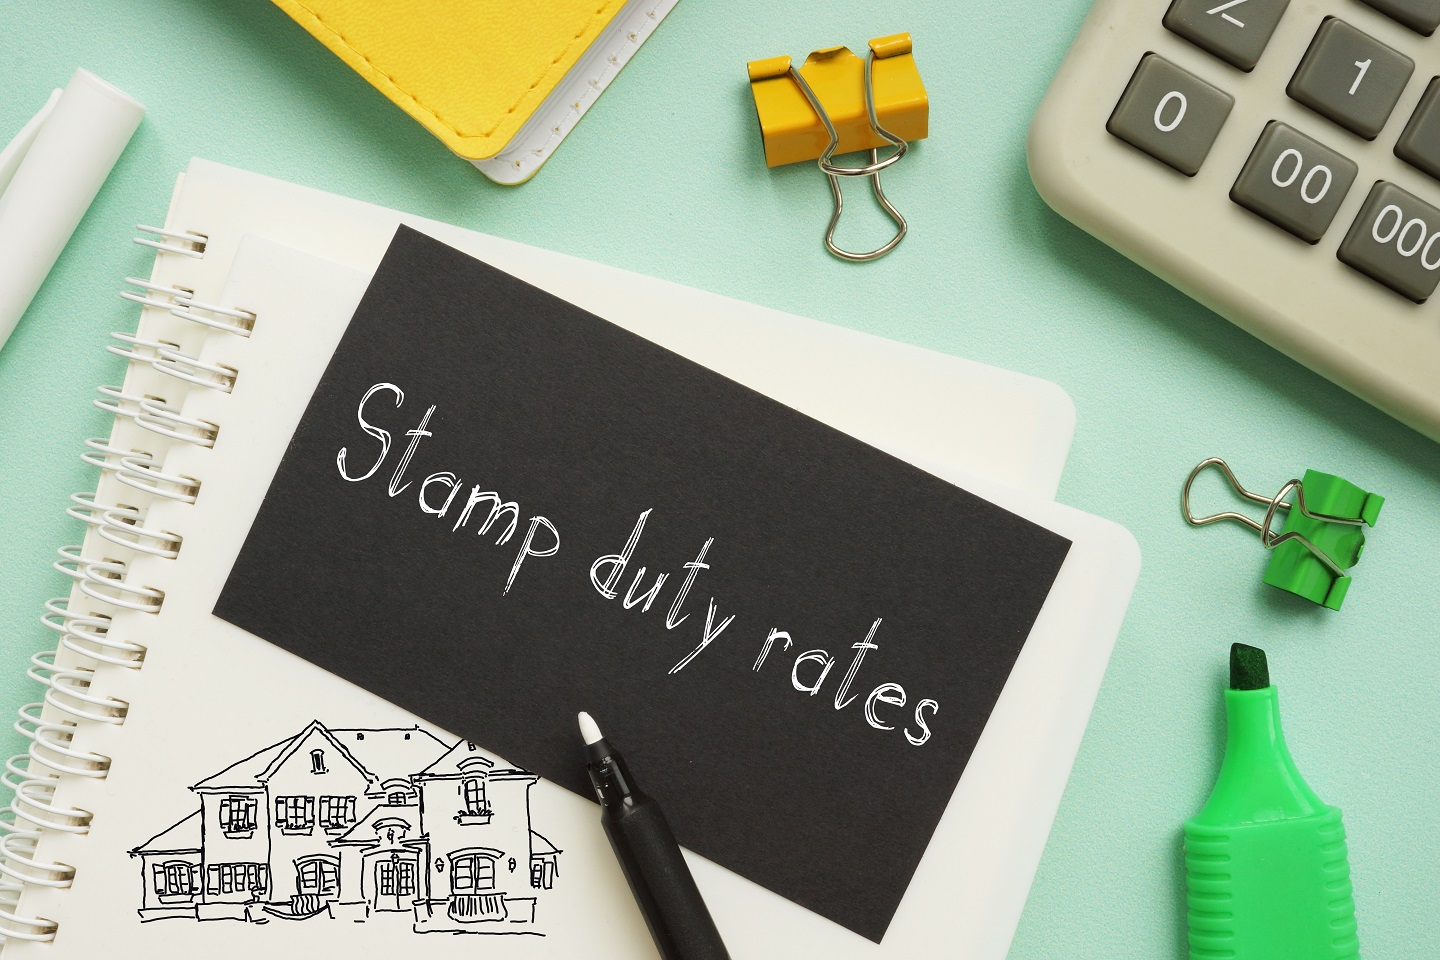 Stamp,Duty,Rates,Is,Shown,On,The,Photo,Using,The